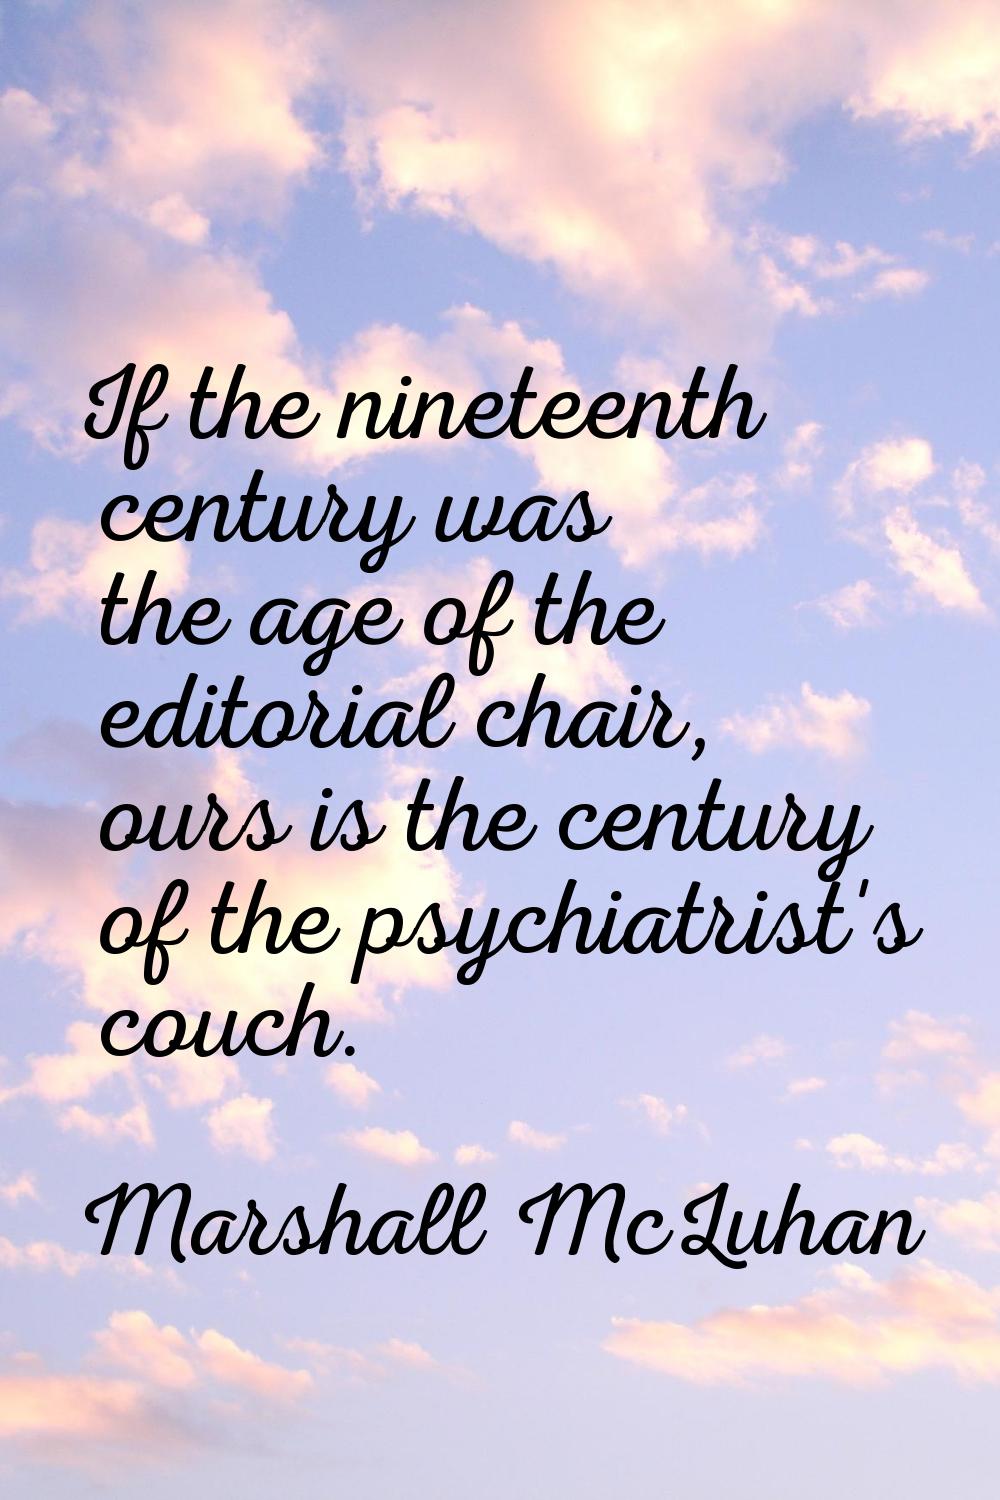 If the nineteenth century was the age of the editorial chair, ours is the century of the psychiatri